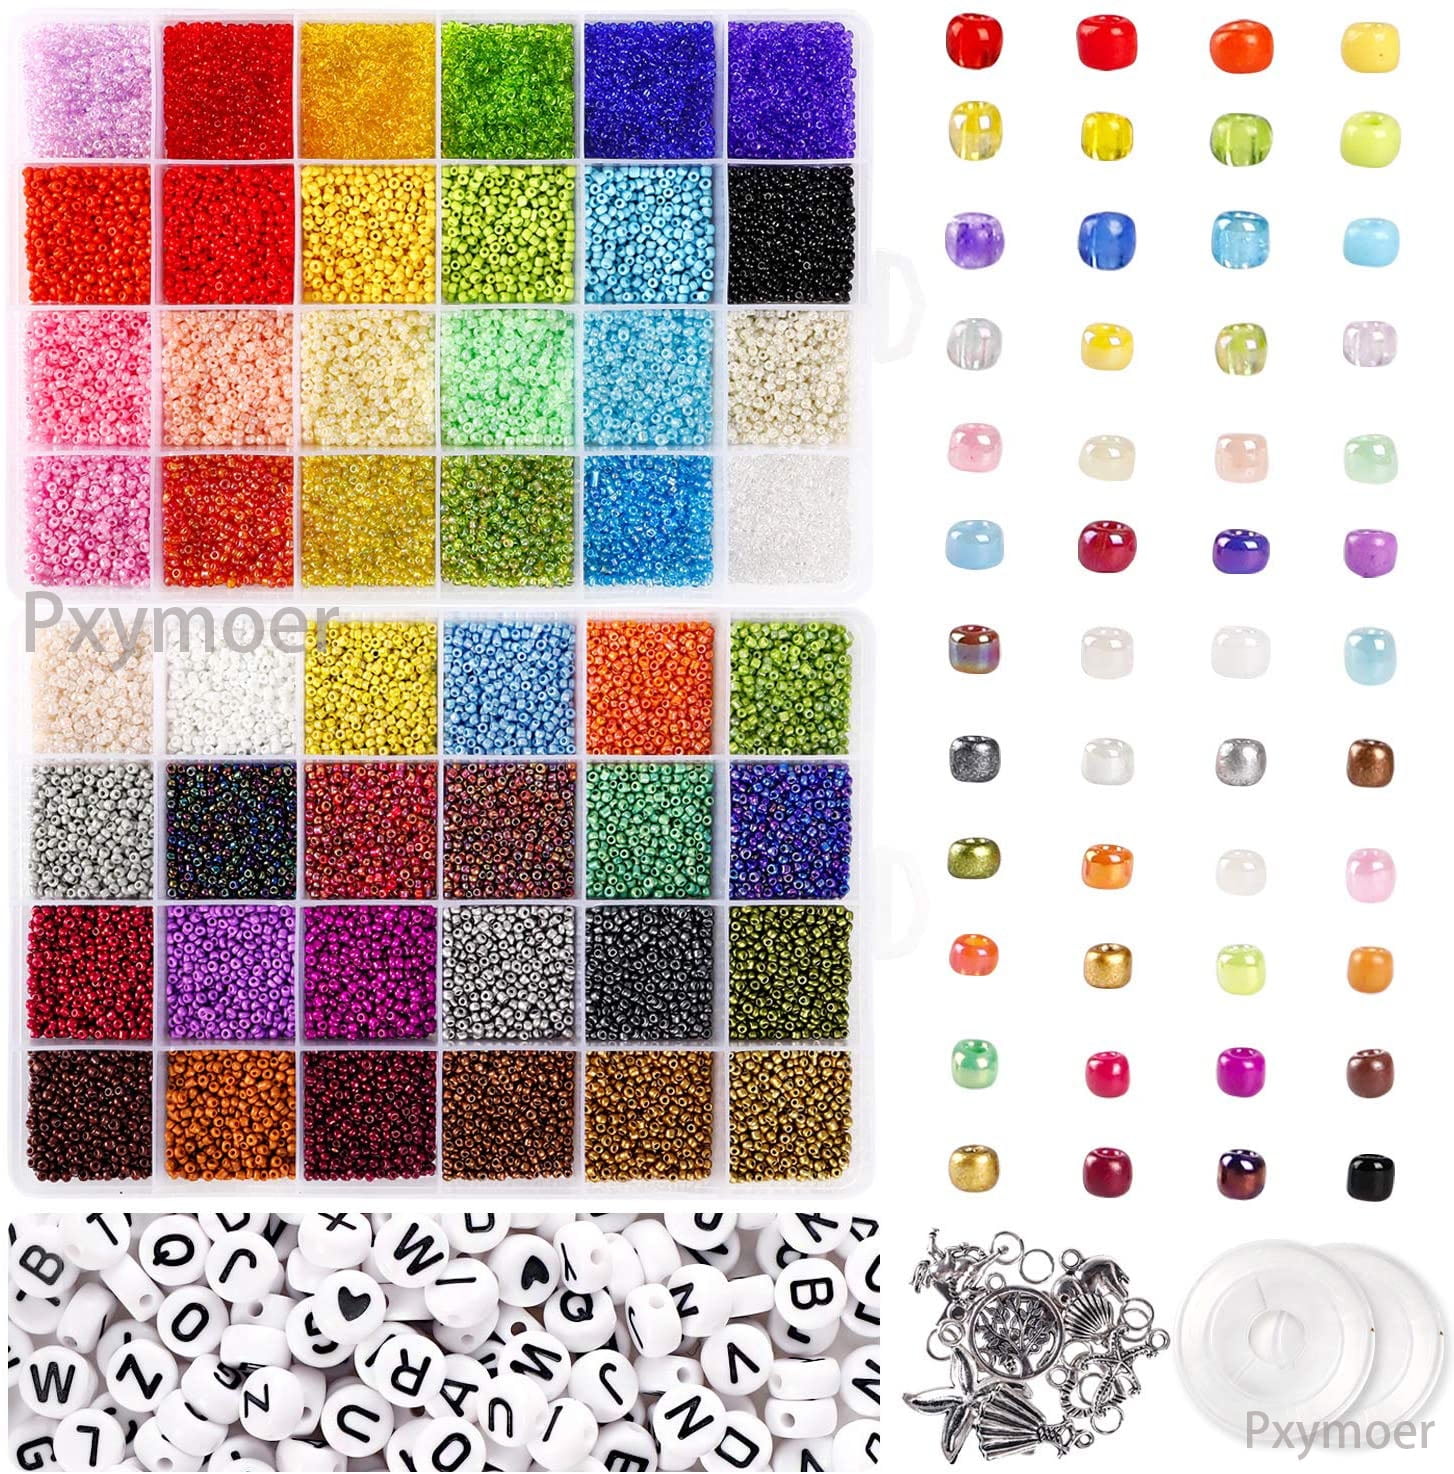 OLIKER 42000Pcs 2mm Glass Seed Beads for Jewelry Making Kit,72 Colors Seed Beads for Jewelry Making with Alphabet Letter Bead